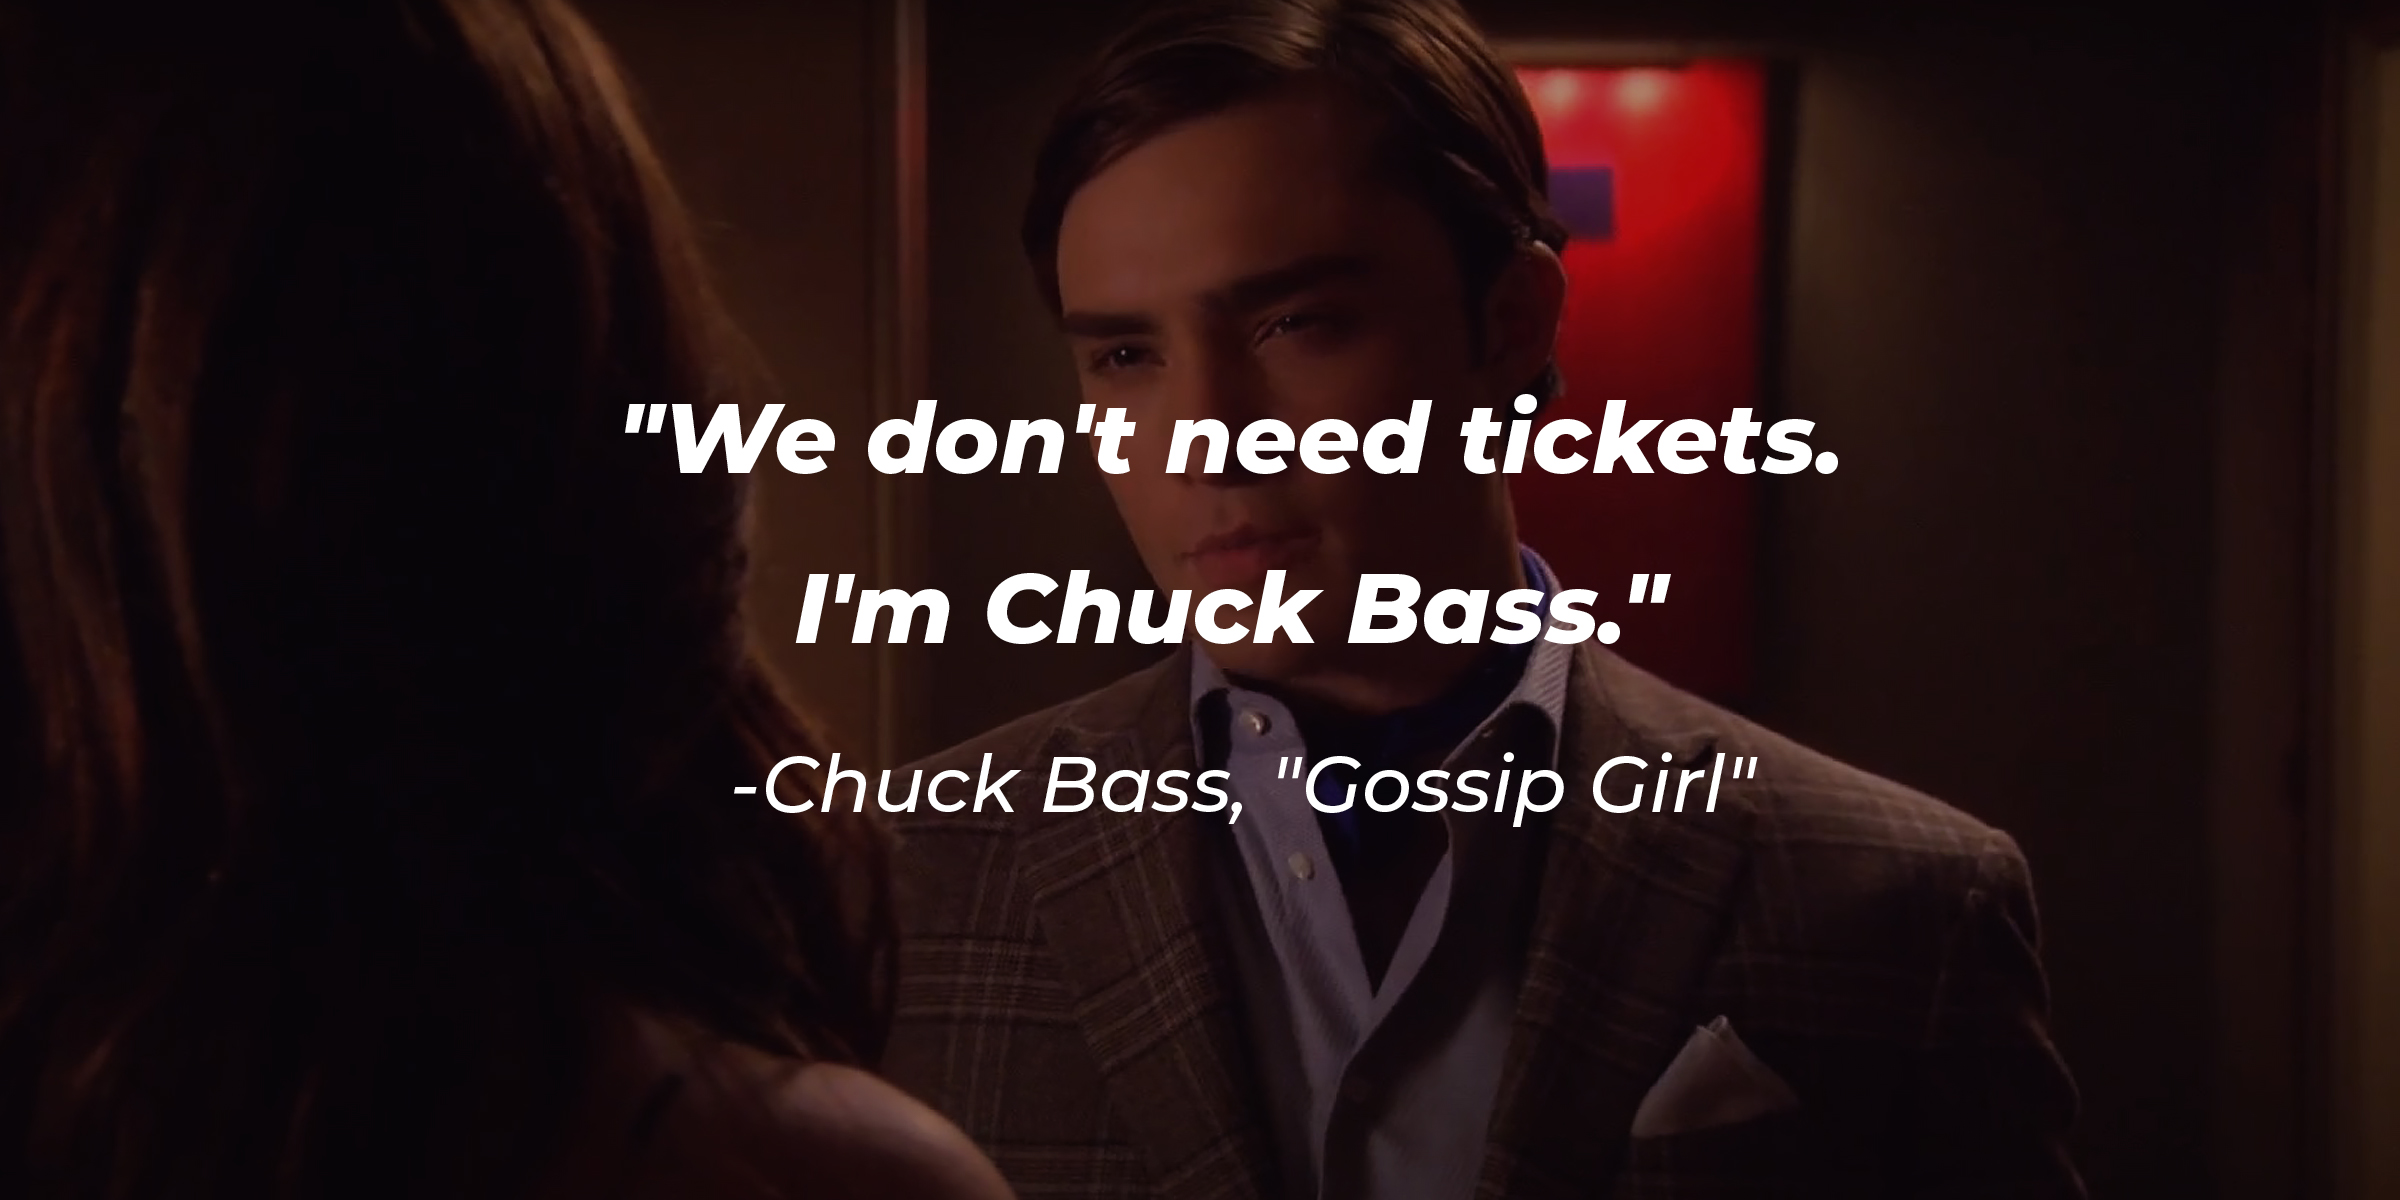 An image of Chuck Bass from "Gossip Girl" with the quote: "We don't need tickets. I'm Chuck Bass." | Source: facebook.com/GossipGirl